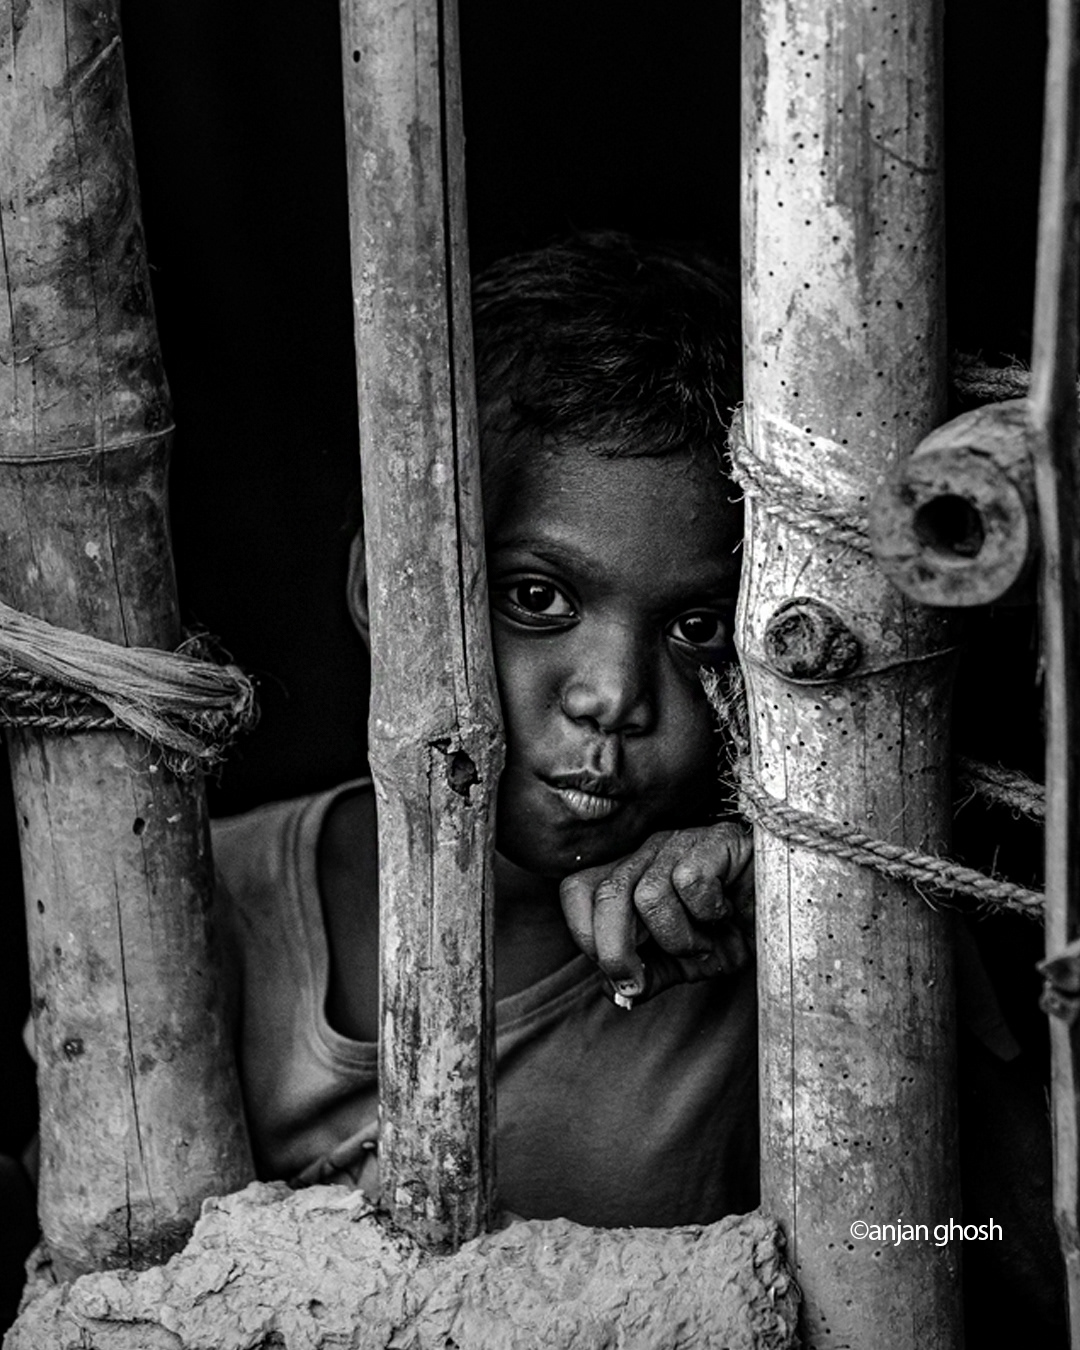 human face portrait Photography  RuralIndia travelphotography streetphotography people black and white street photography storytelling photography